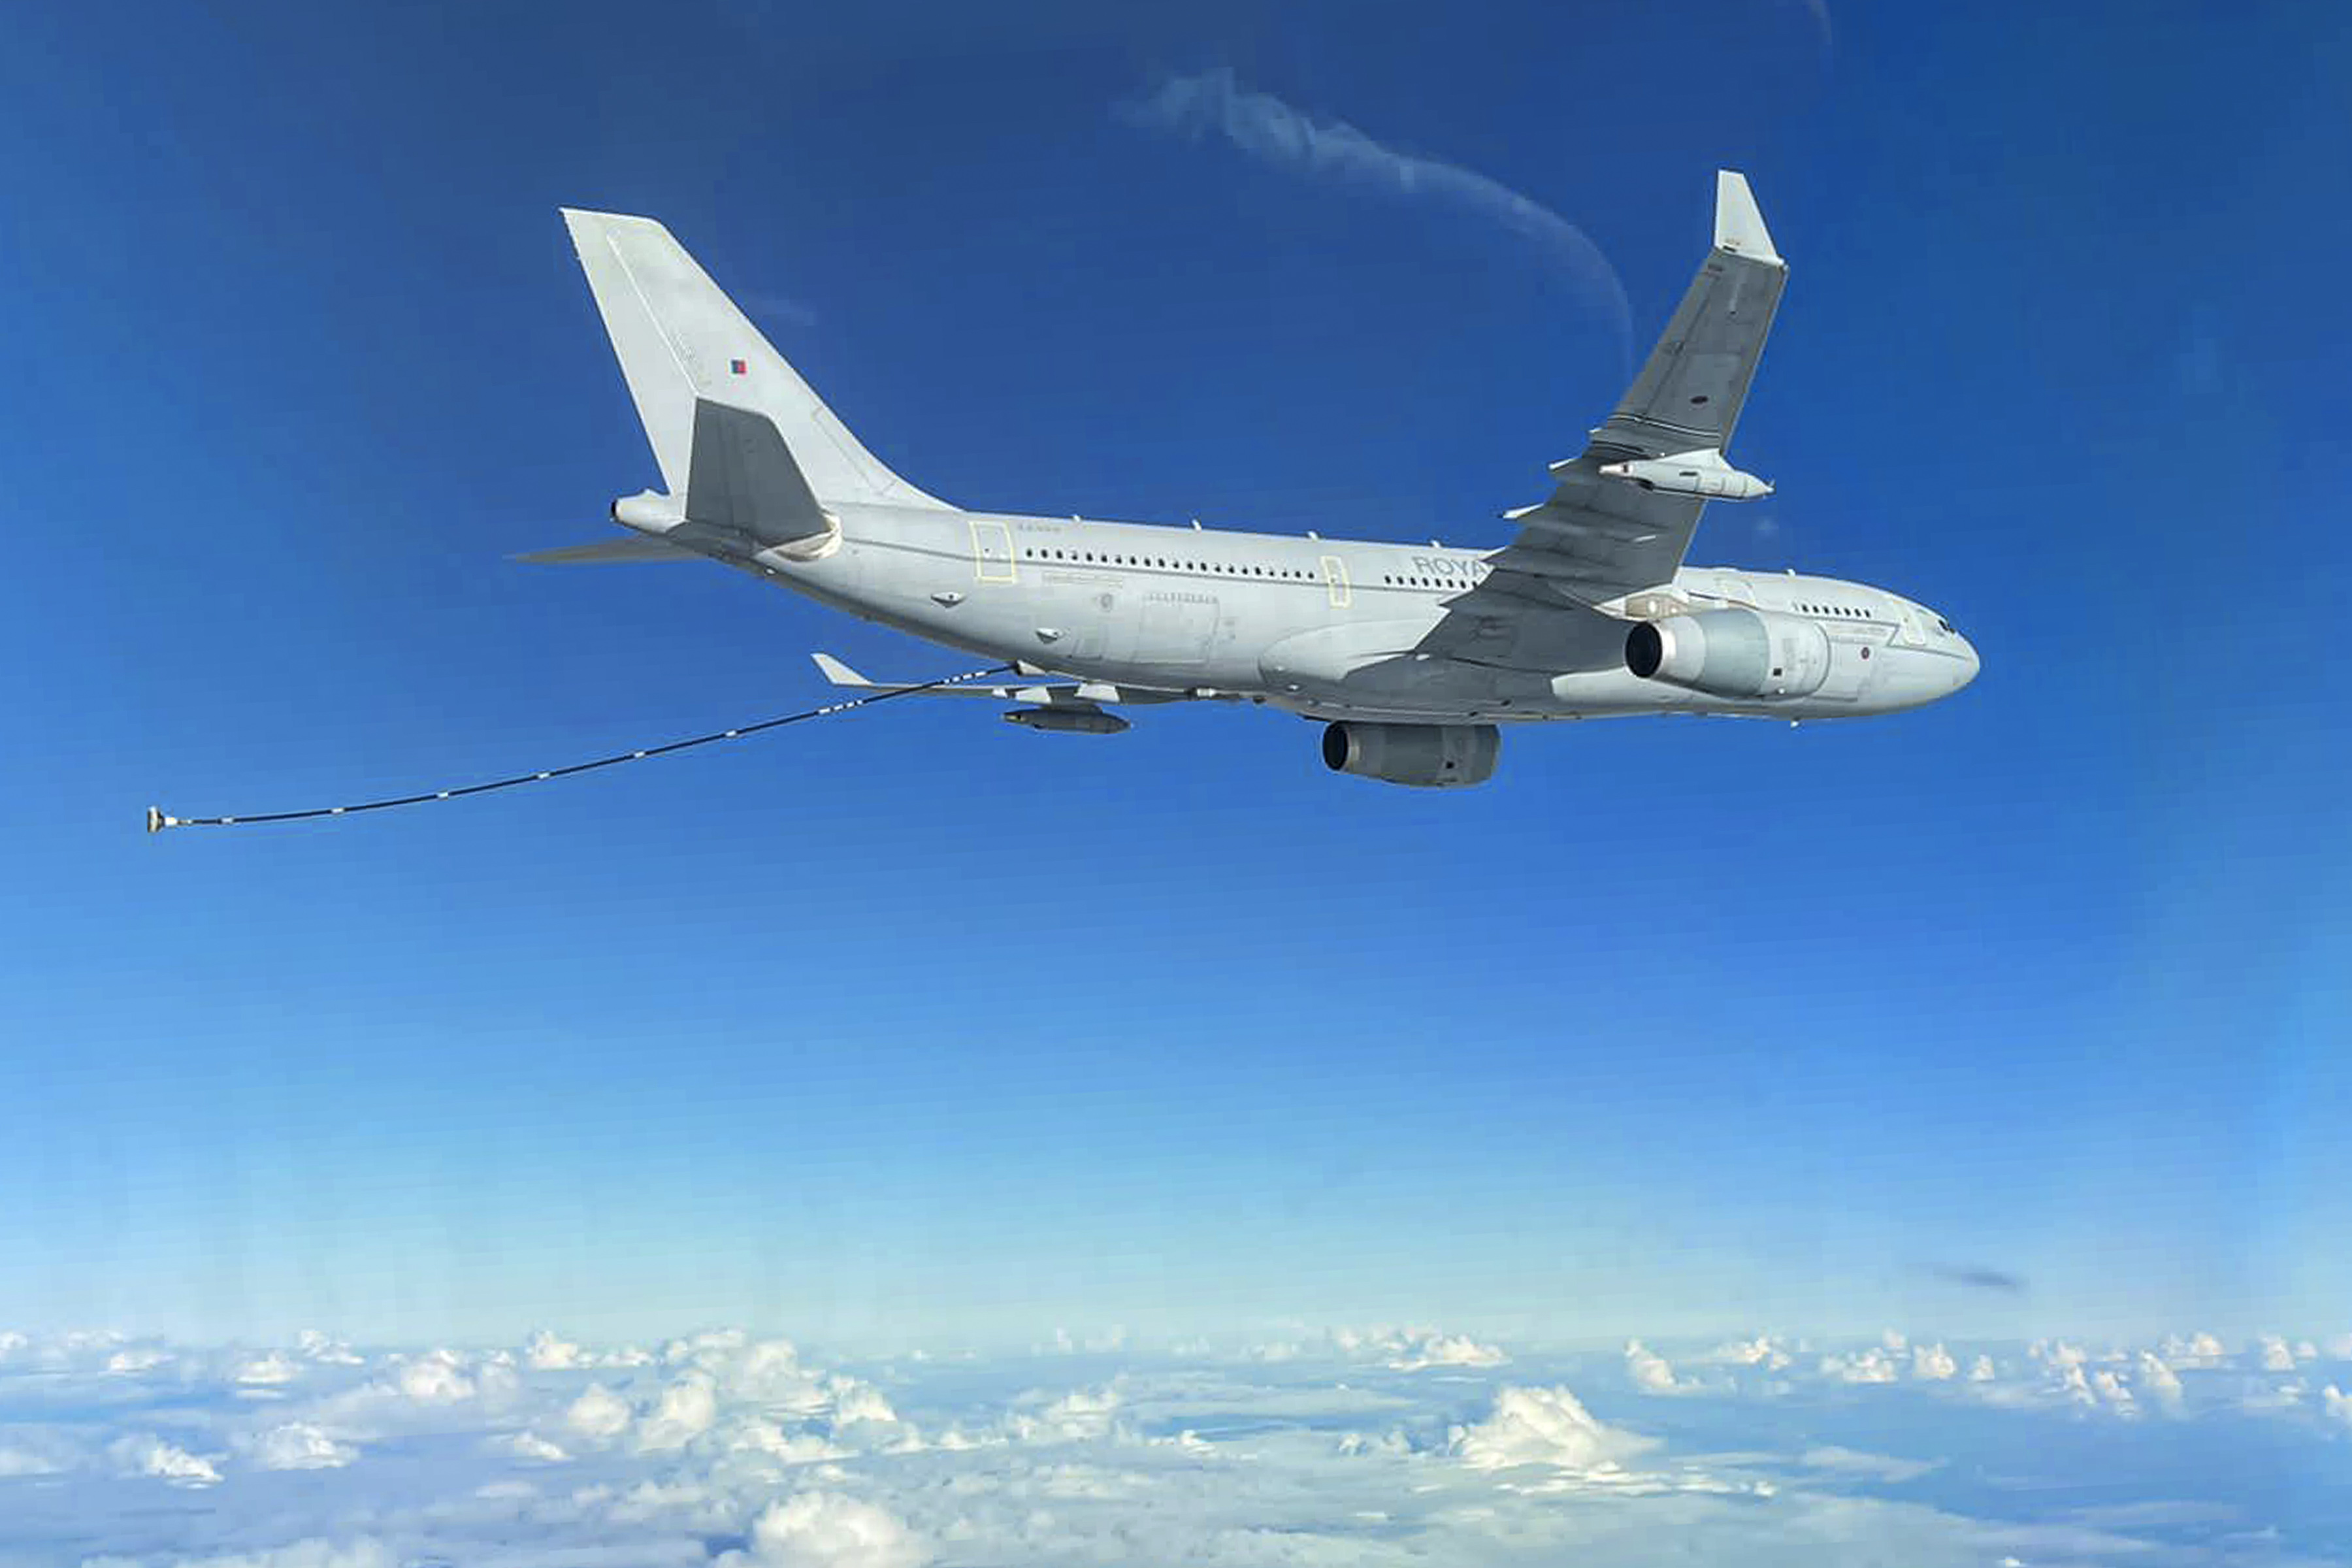 Image shows Voyager transport aircraft in flight during air to air refuelling.